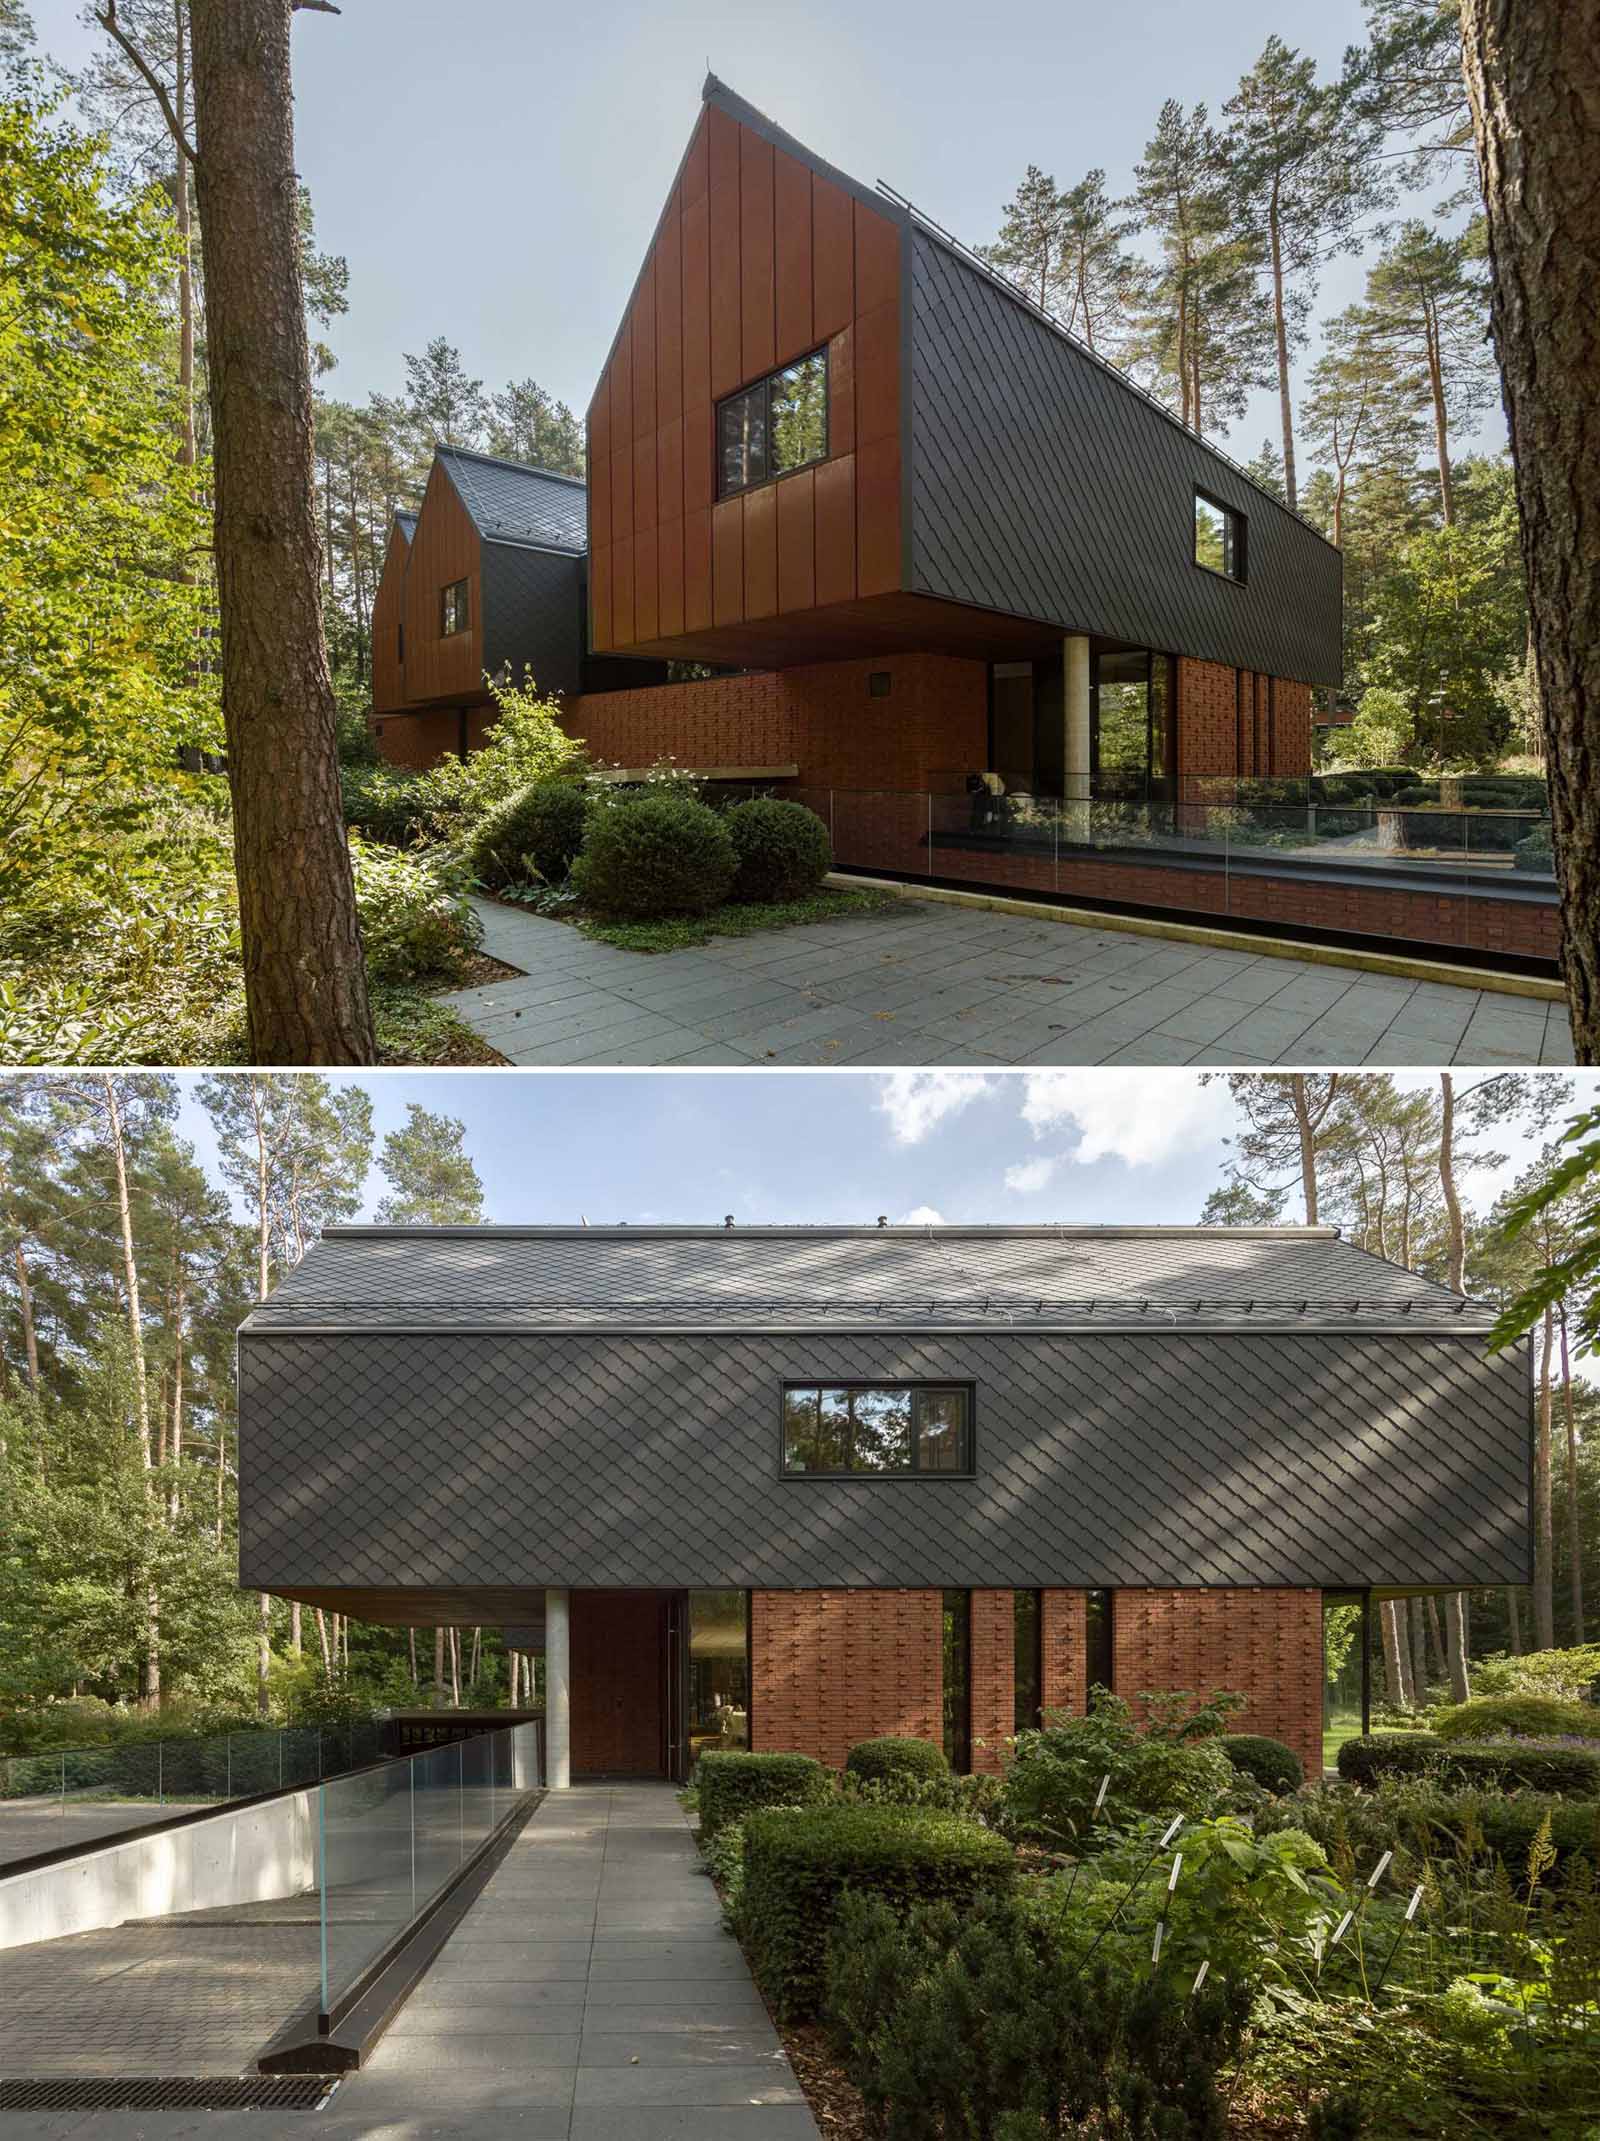 A modern home in the forest, features gabled forms, red brick, black-coated tiles, and an weathered steel on its exterior.